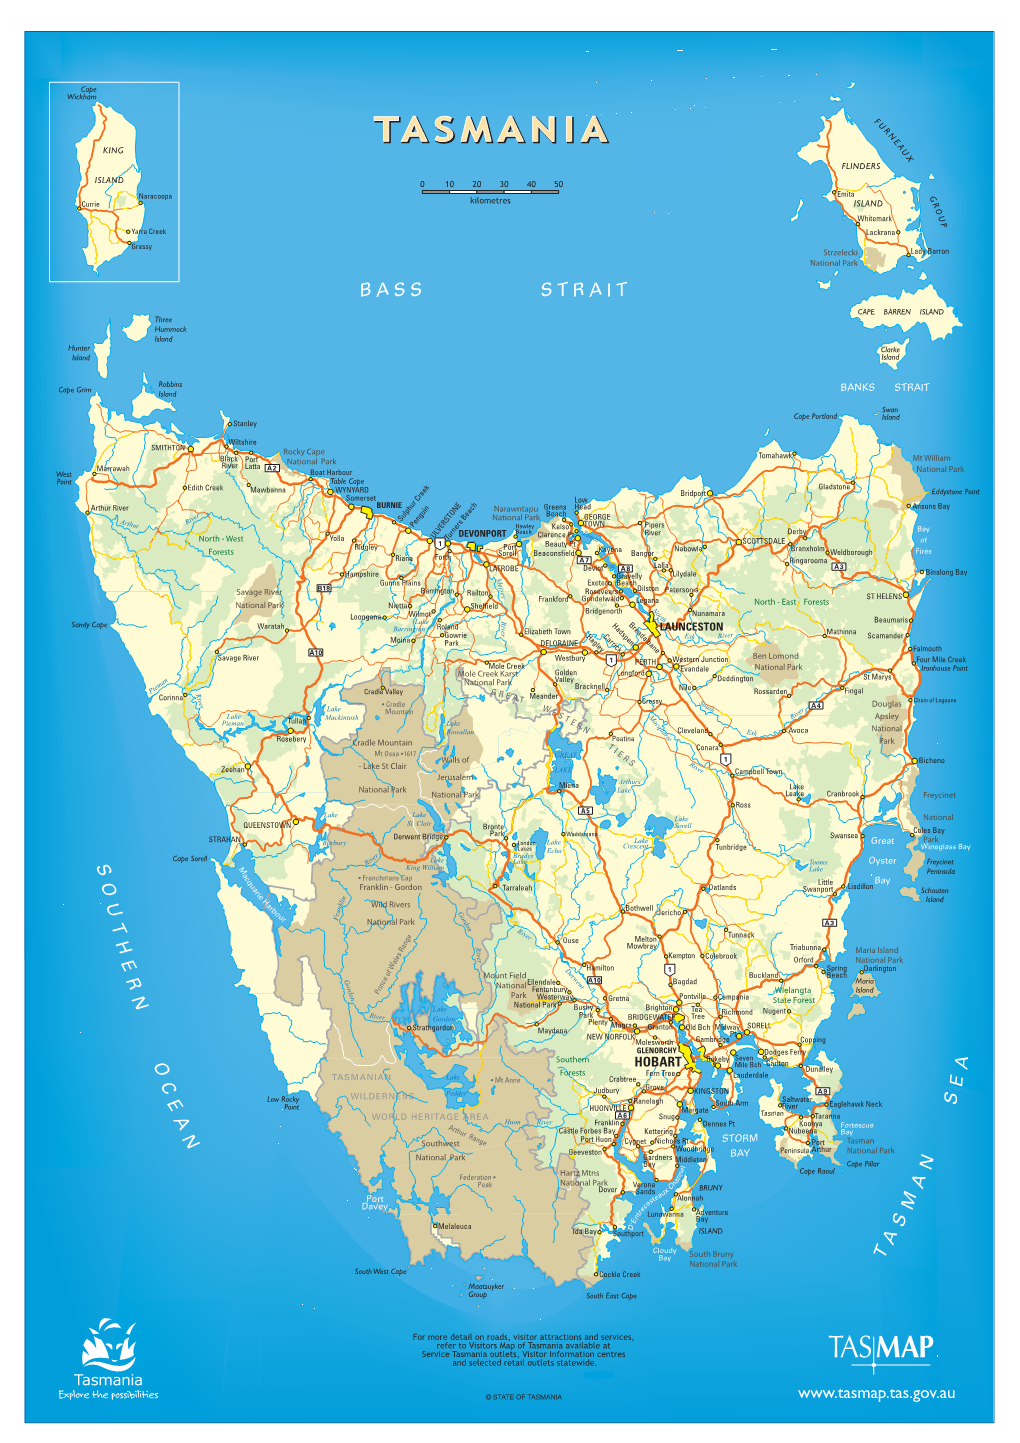 Map of Tasmania Available at Service Tasmania Outlets, Visitor Information Centres and Selected Retail Outlets Statewide